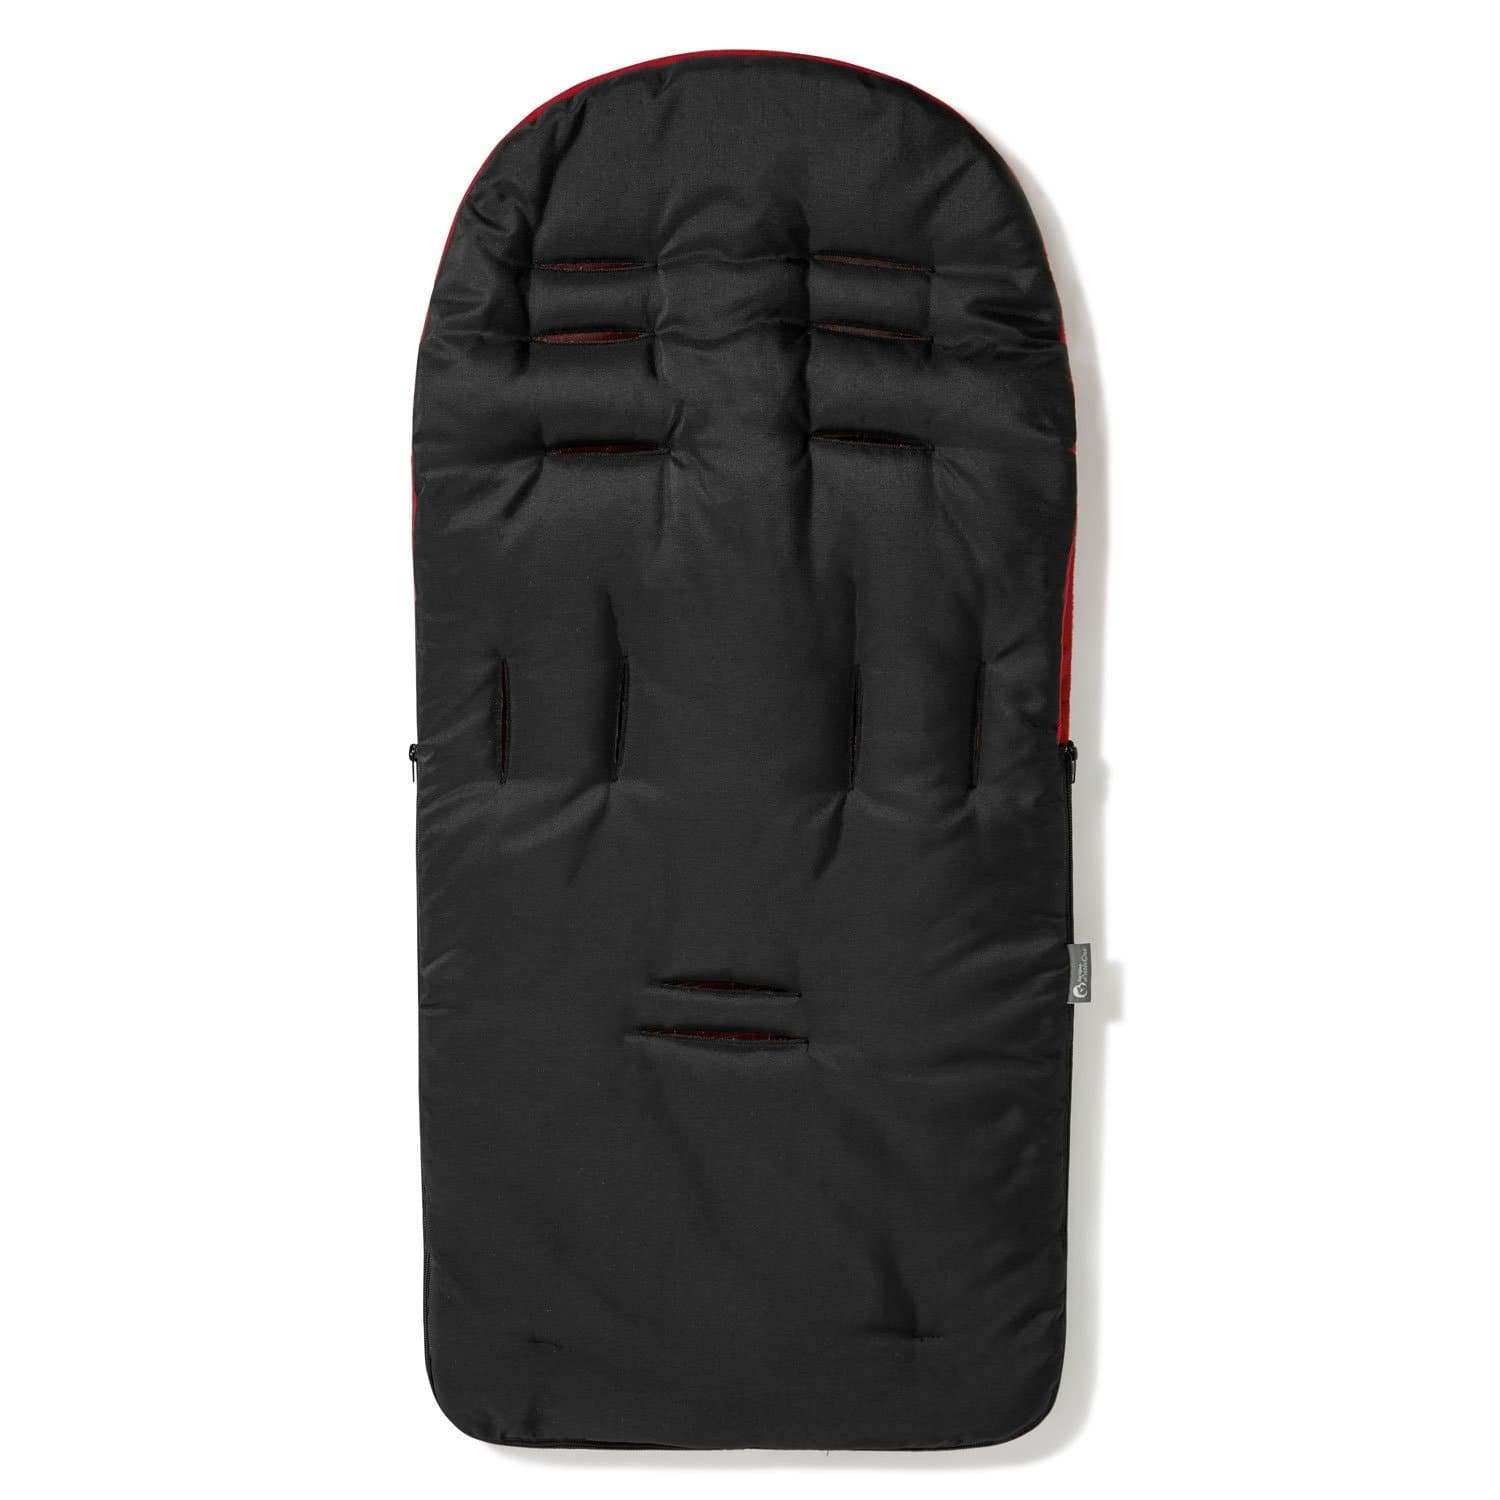 Premium Footmuff / Cosy Toes Compatible with Maxi Cosi - For Your Little One